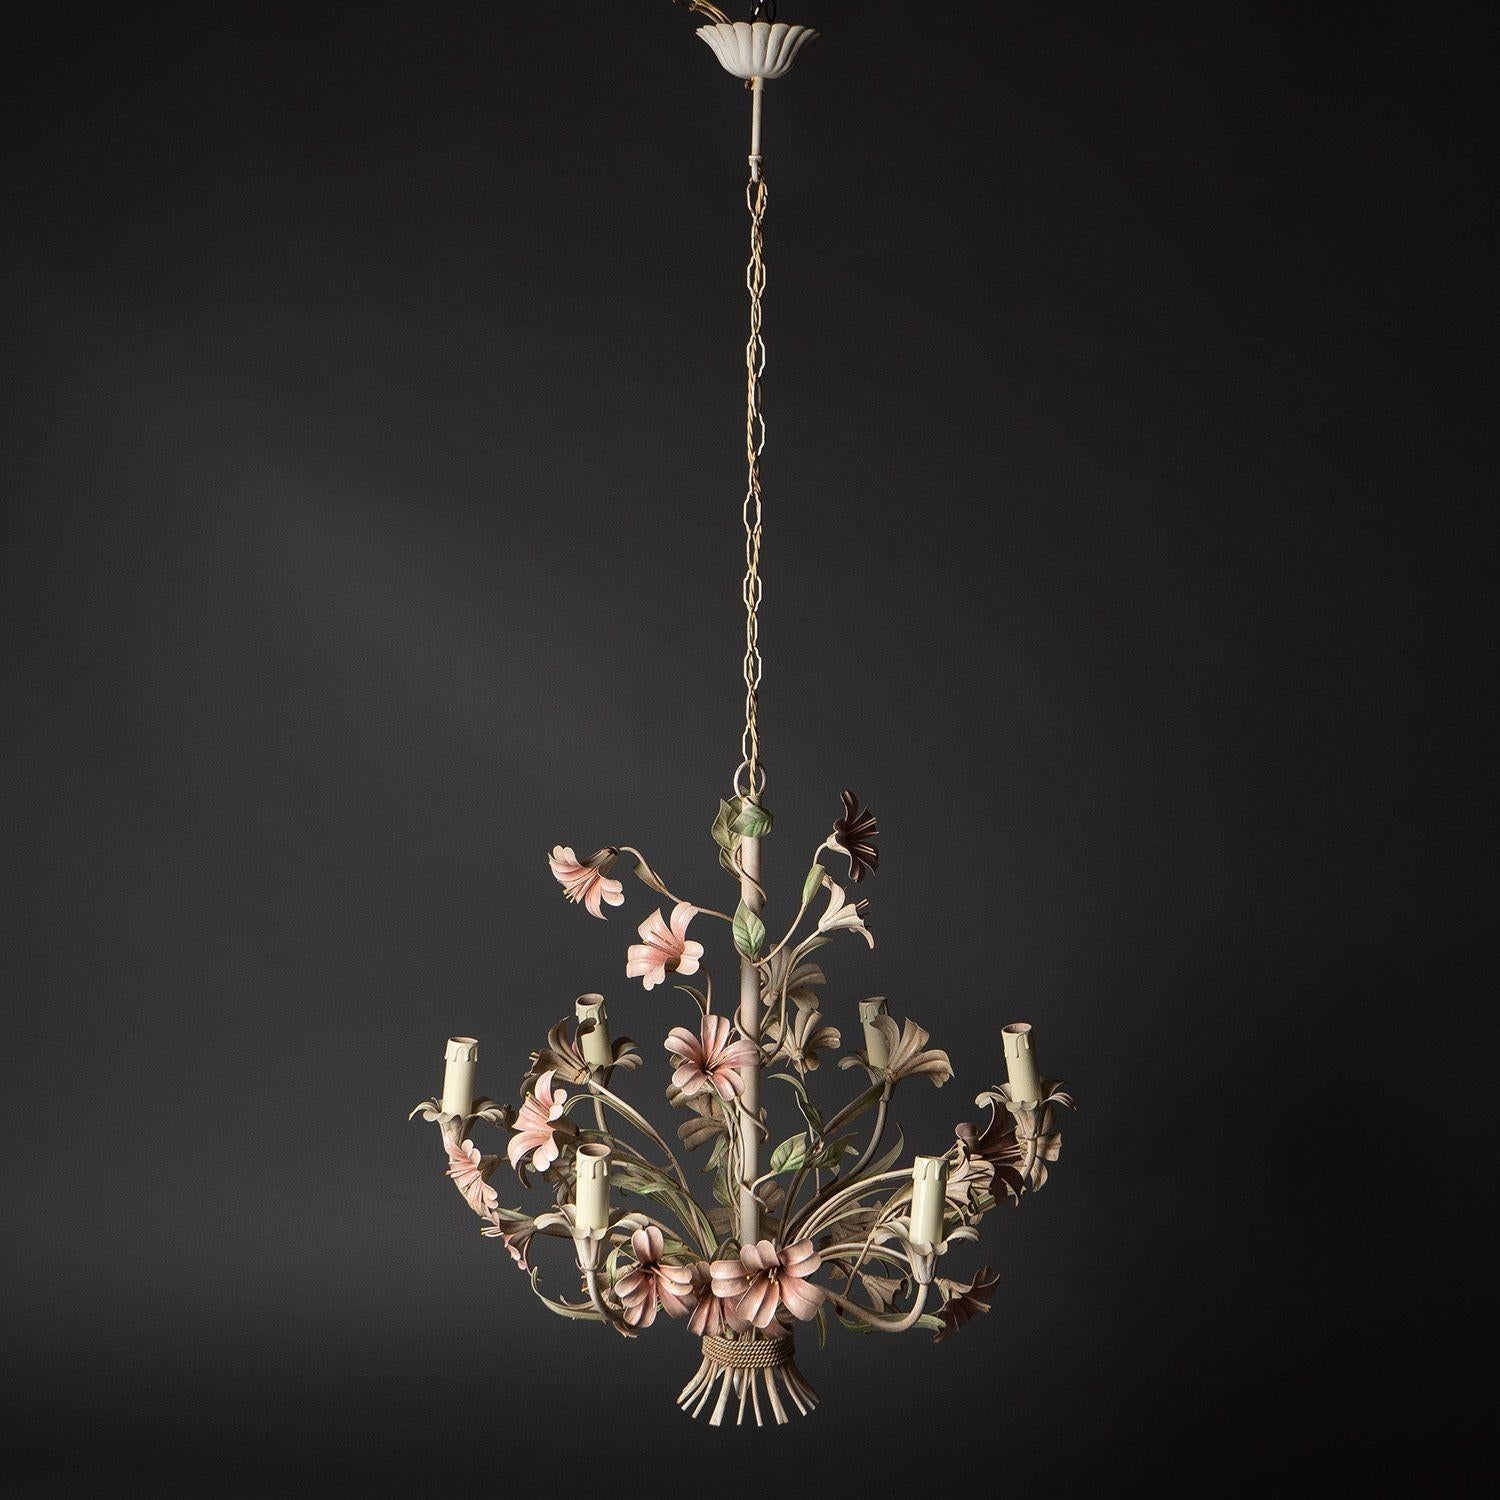 Hollywood Regency Large Floral Toleware Chandelier with Hibiscus Flowers